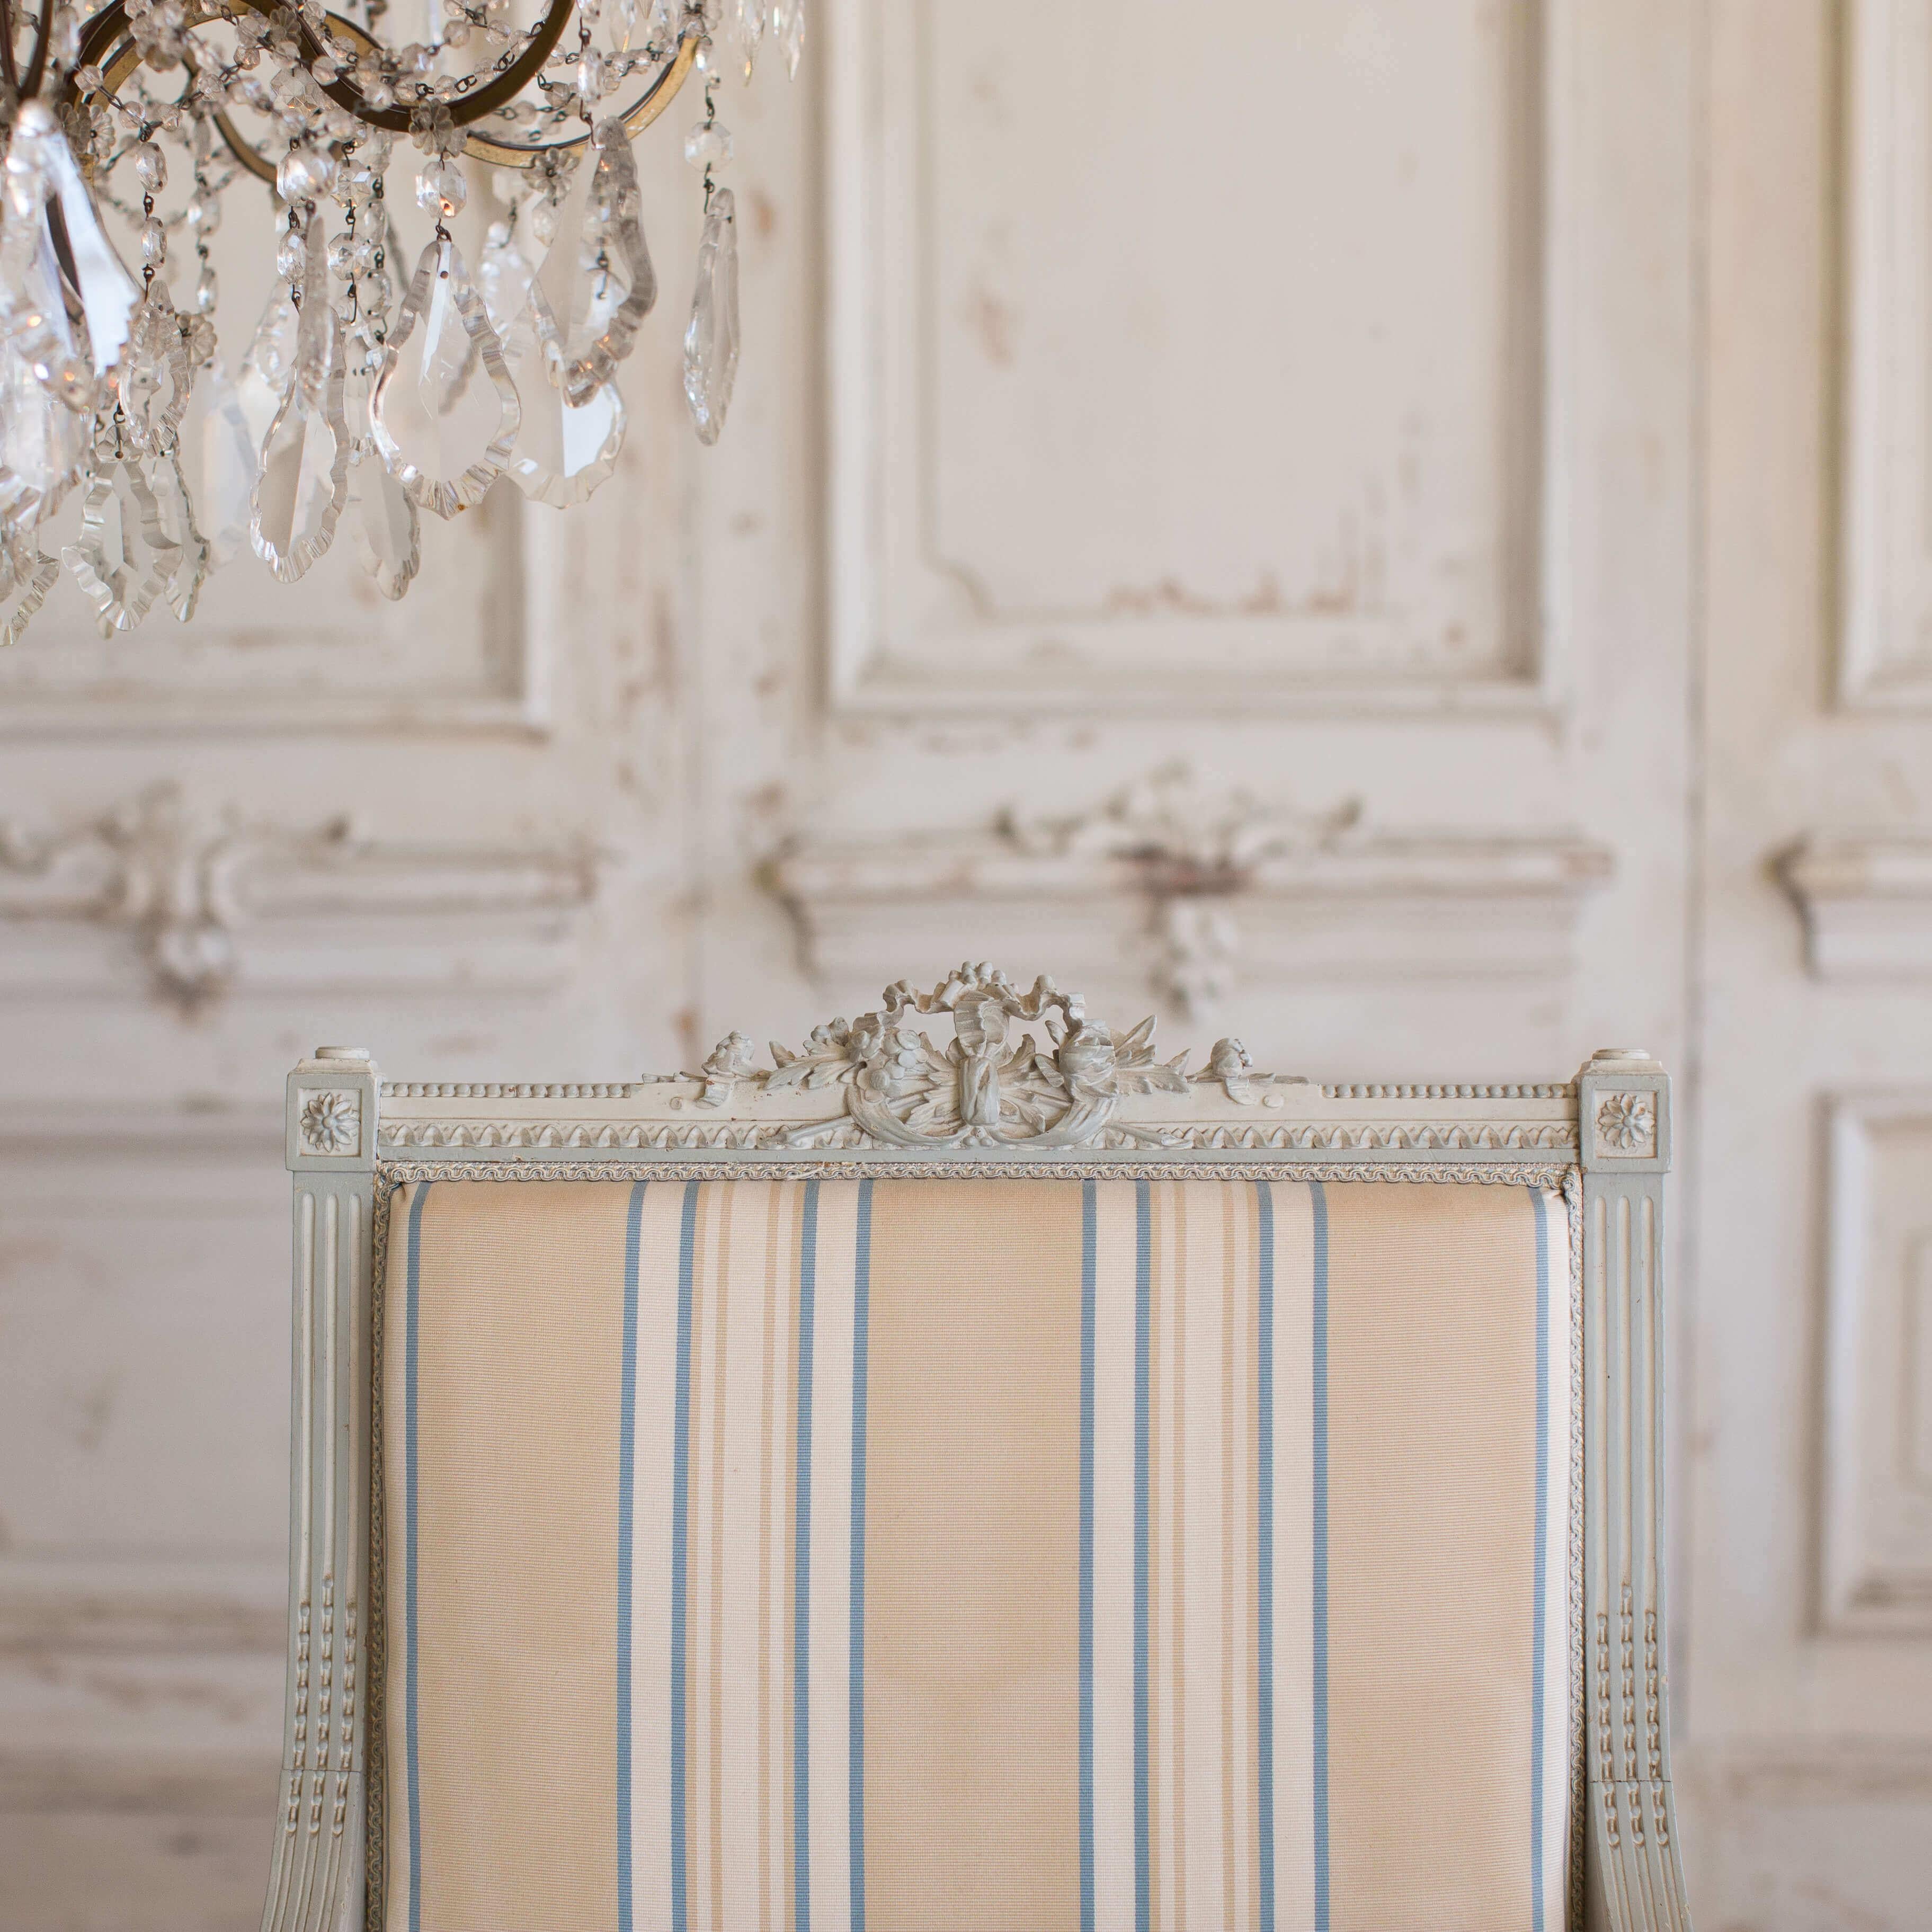 Charming antique French Louis XVI style armchairs. Very finely carved delicate frame with beautiful two-tone painted finish in pale grey and dark oyster. Upholstered in a beige, white and blue stripe fabric.